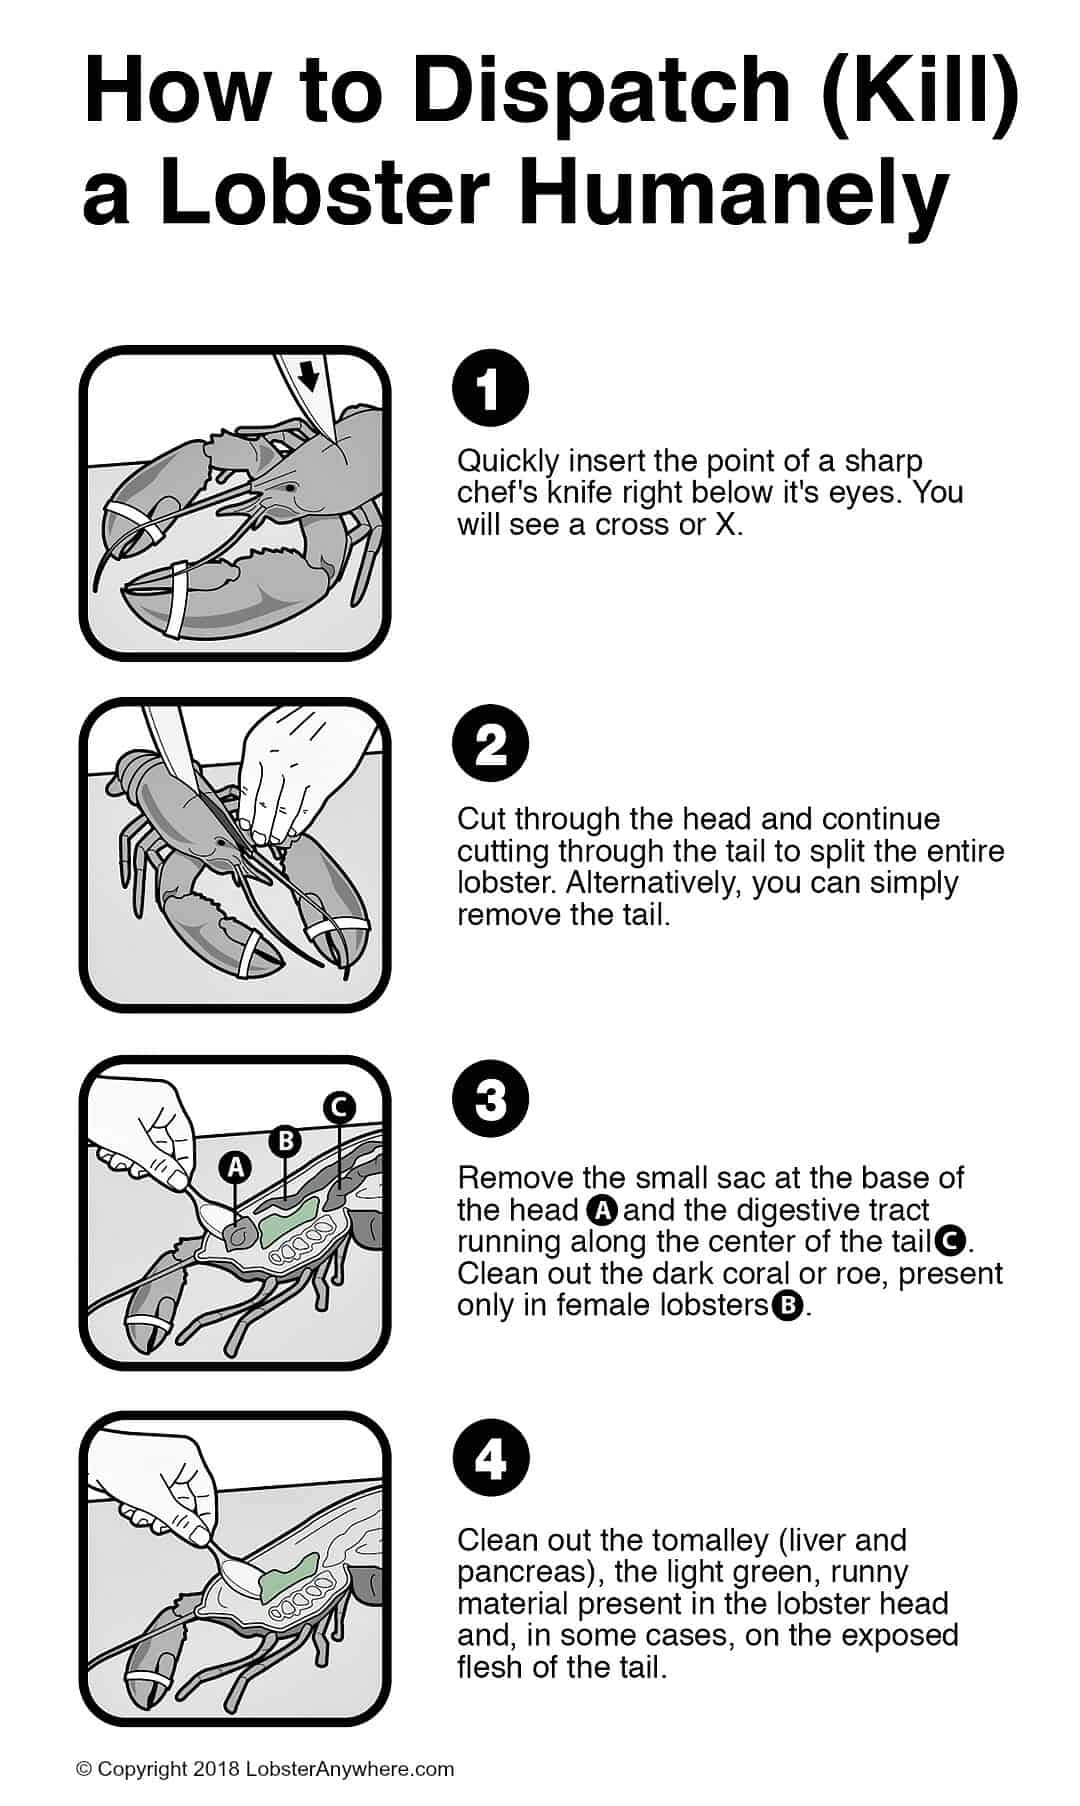 How to Kill Lobster